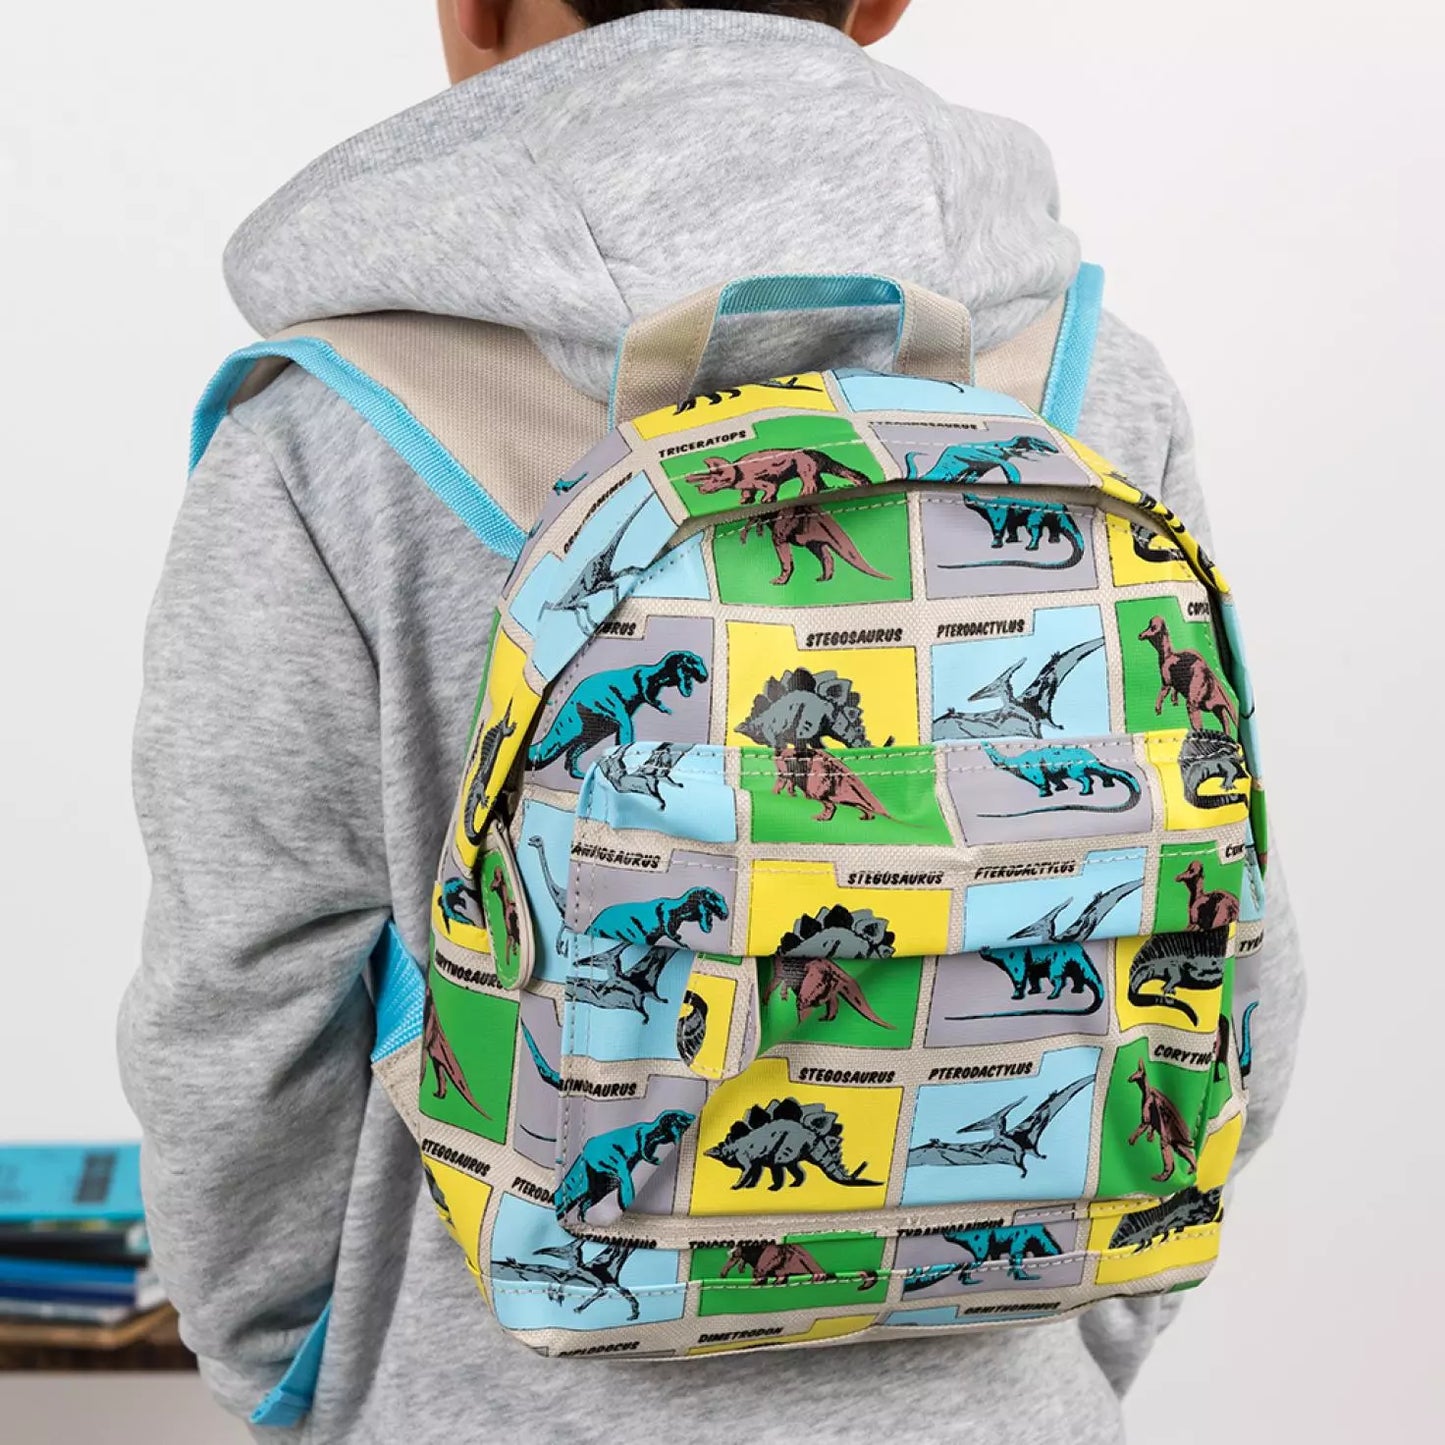 A childs backpack by Rex London, style Prehistoric Land, in blue, green and yellow multi dino print, two compartments with zip fastenings. Lifestyle image.